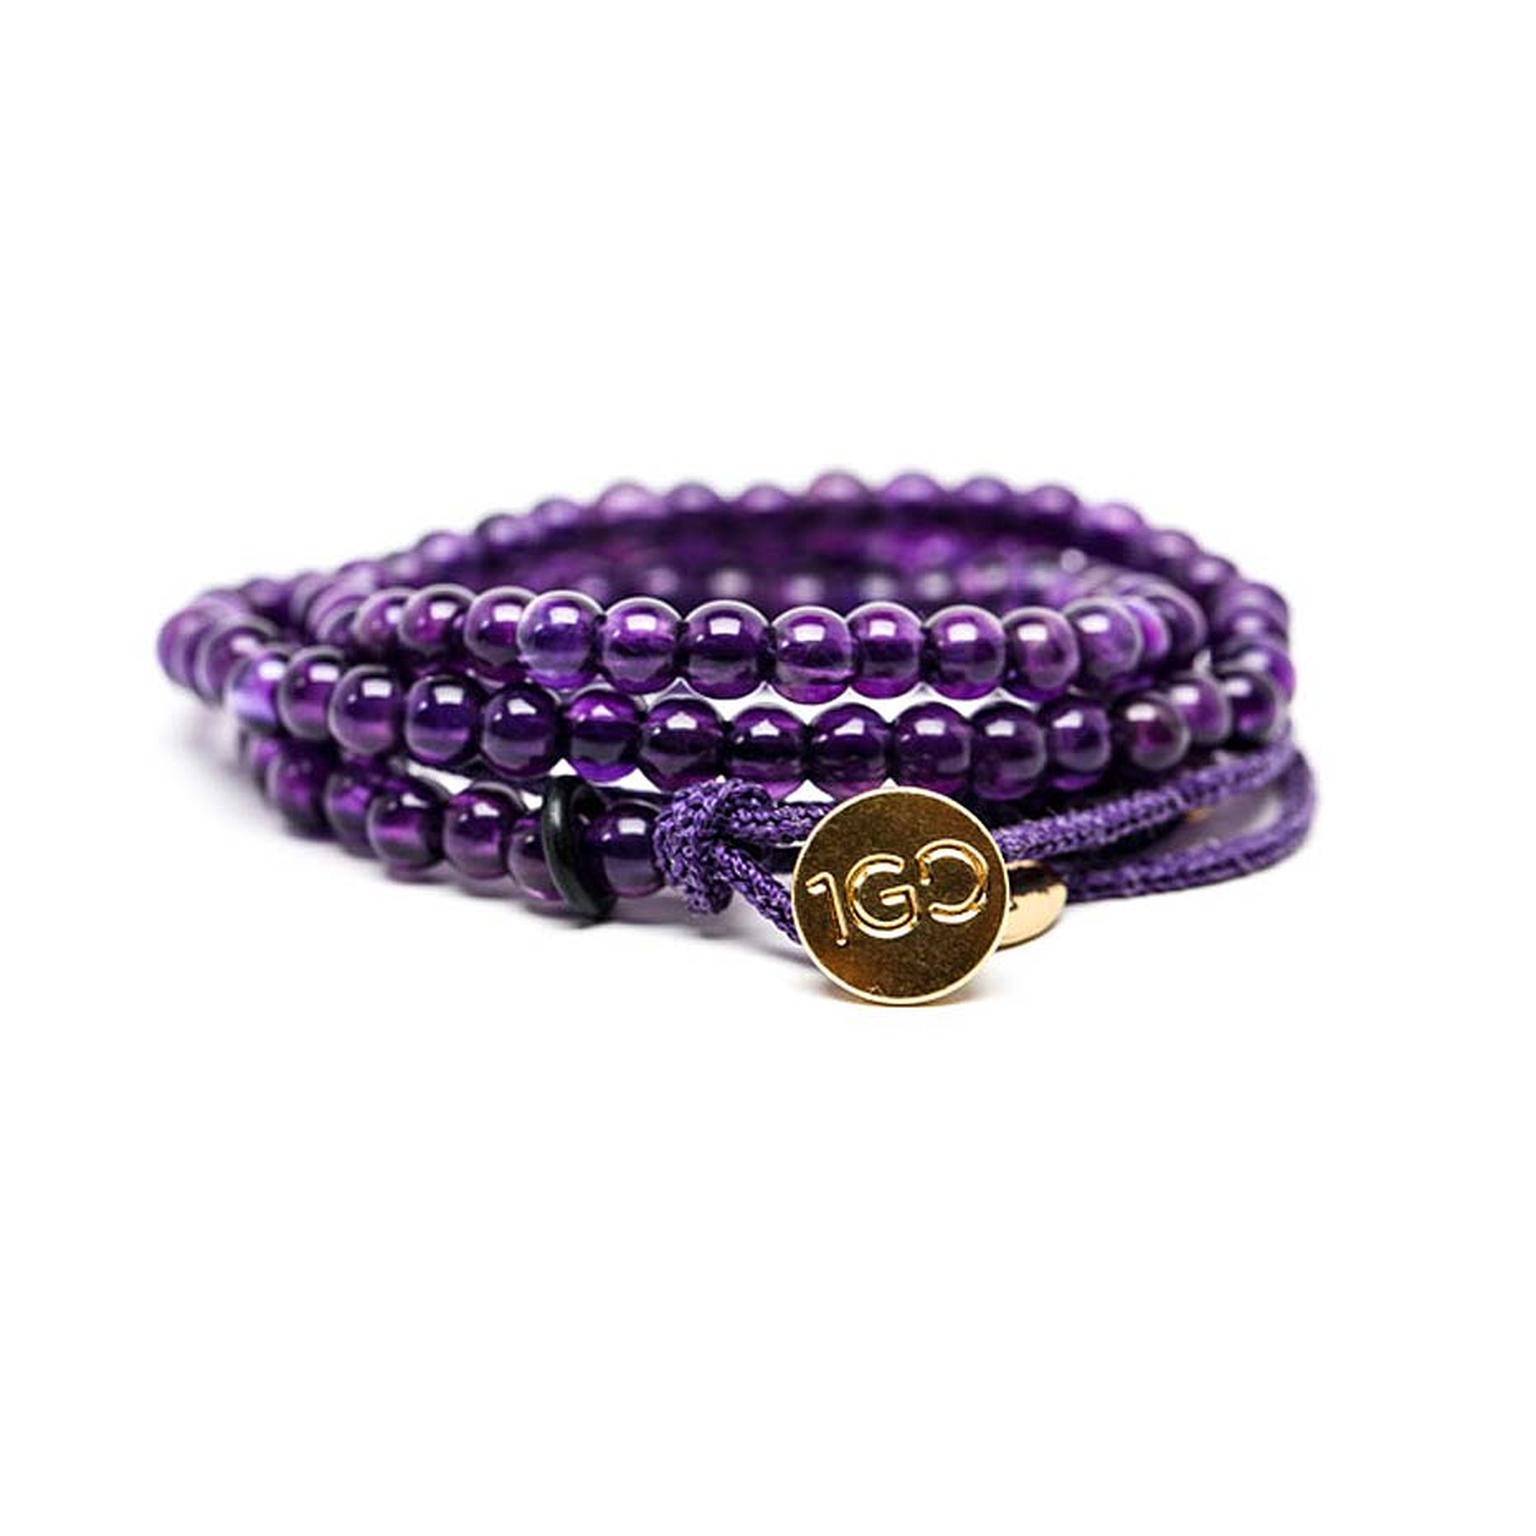 Gemfields limited edition 100 Good Deeds amethyst bracelet featuring ethically mined amethyst beads from Gemfields' mine in Zambia. $475.